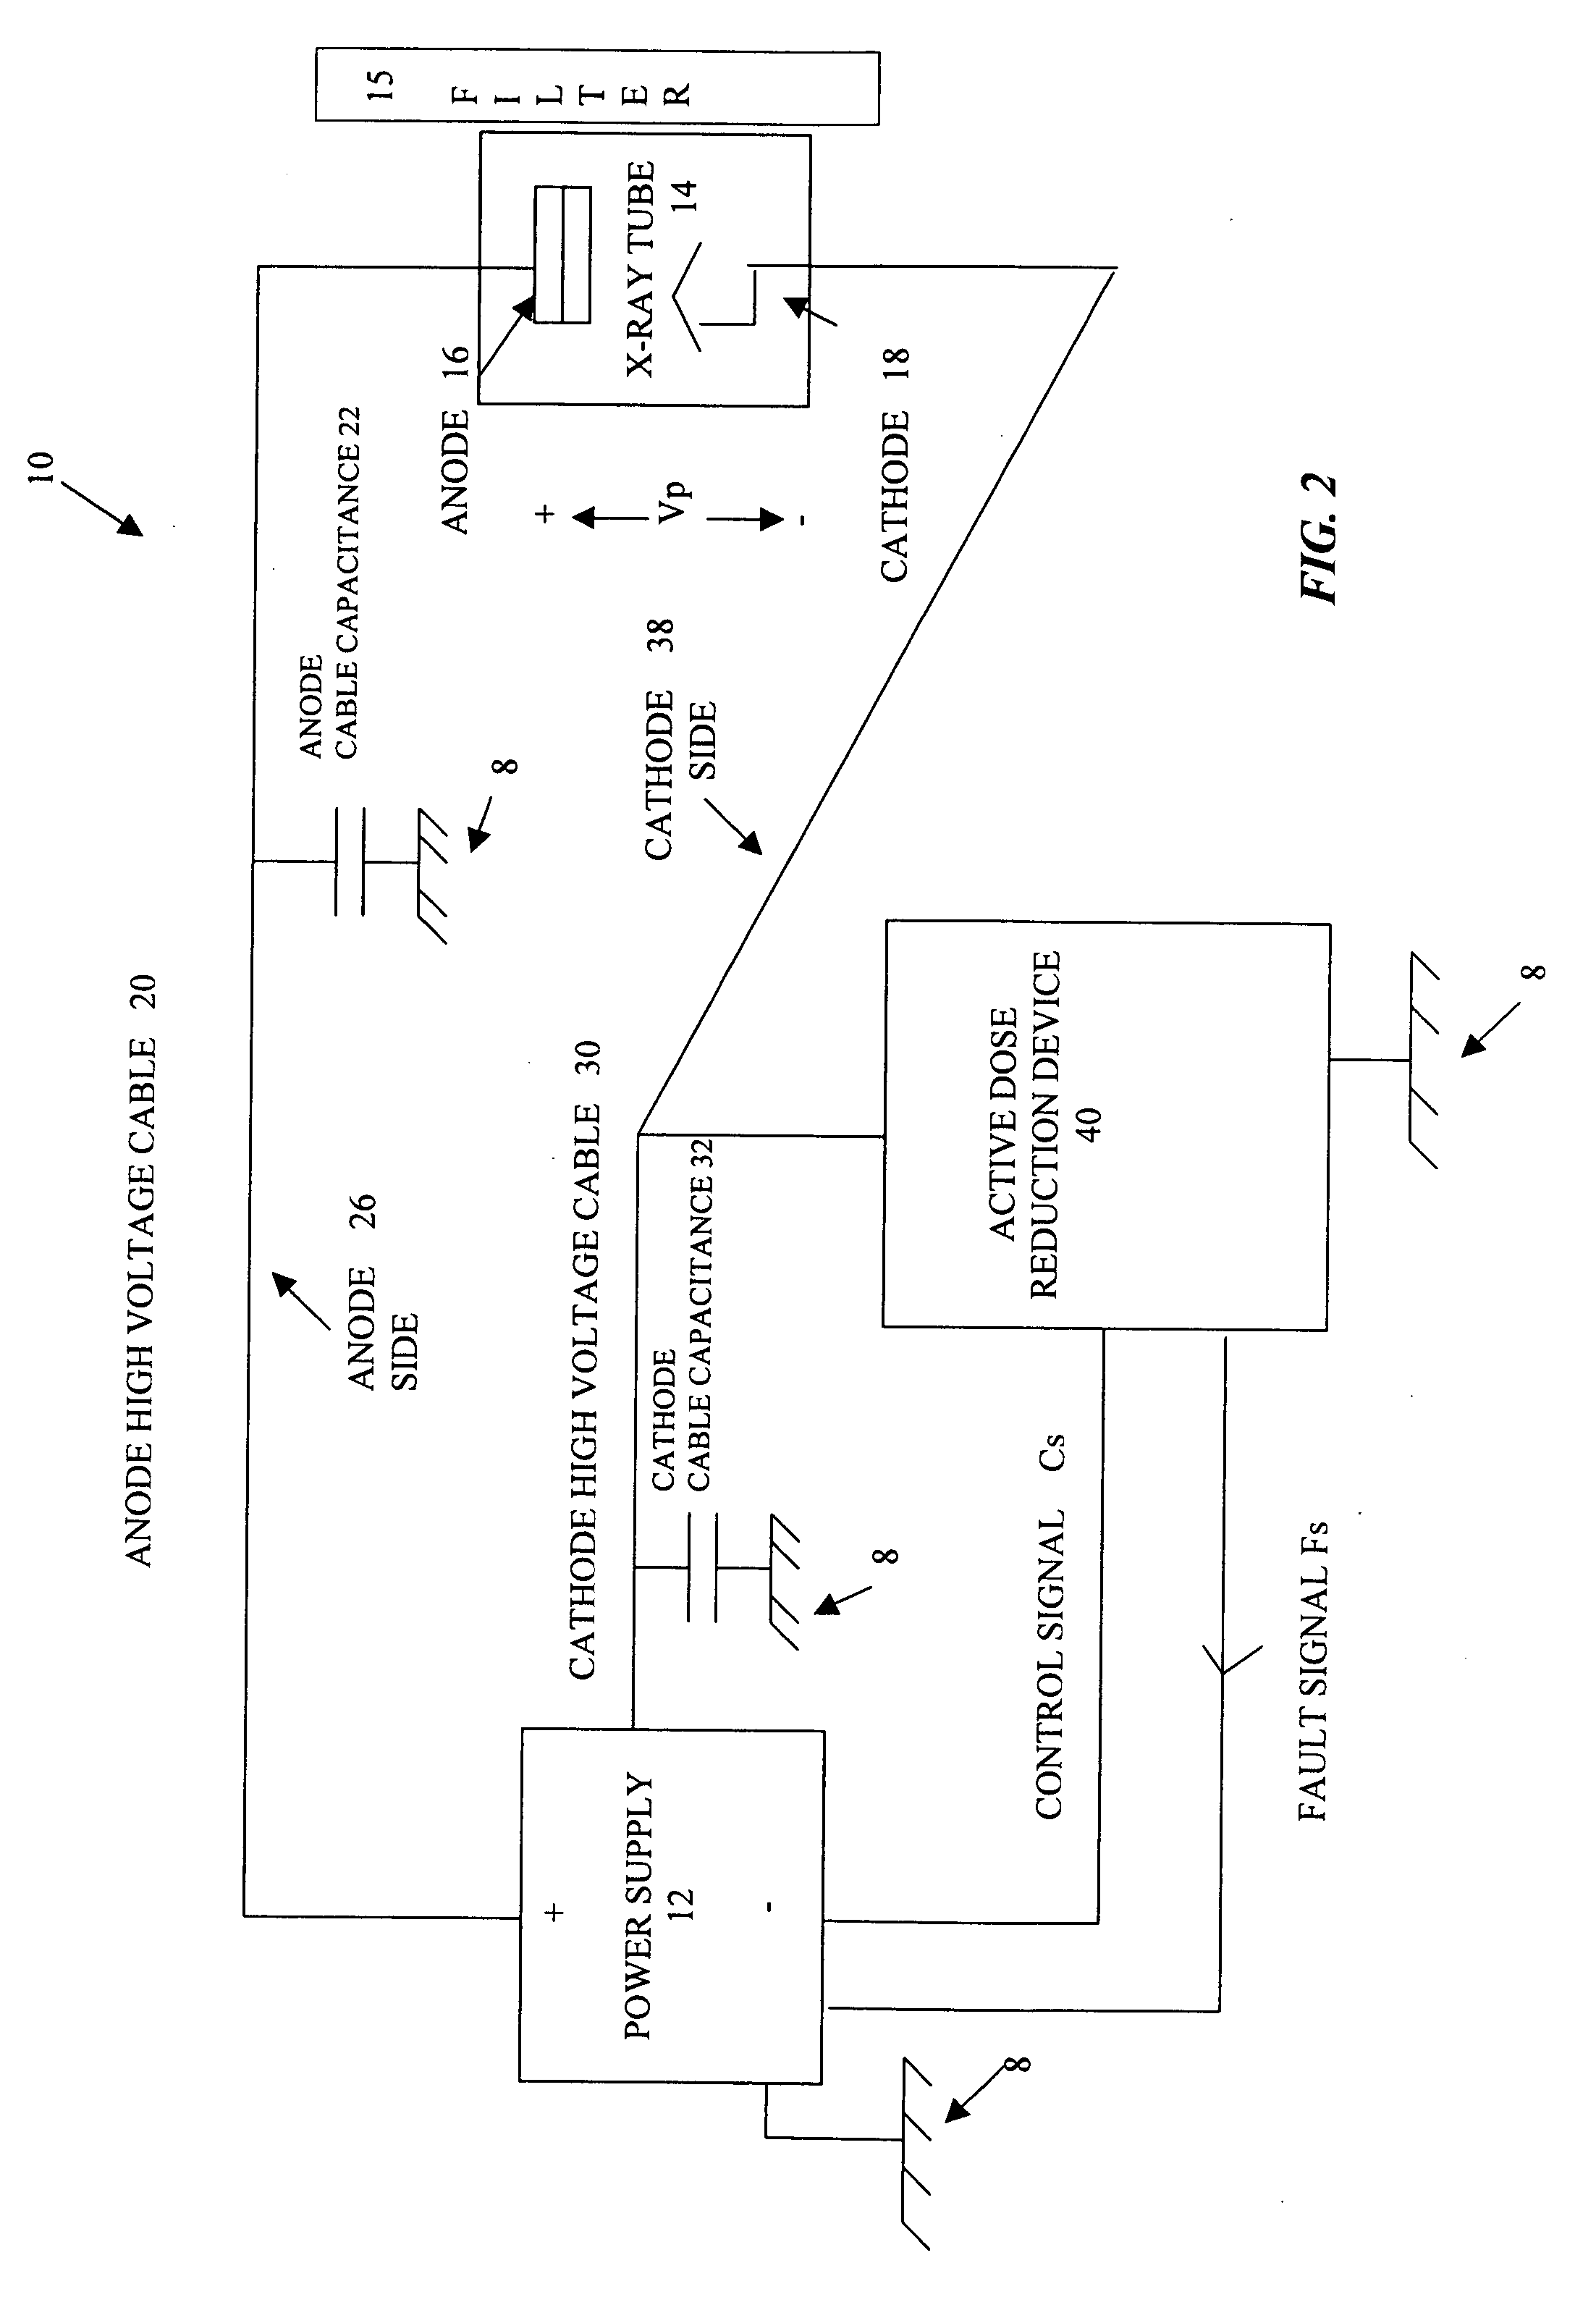 Active dose reduction device and method